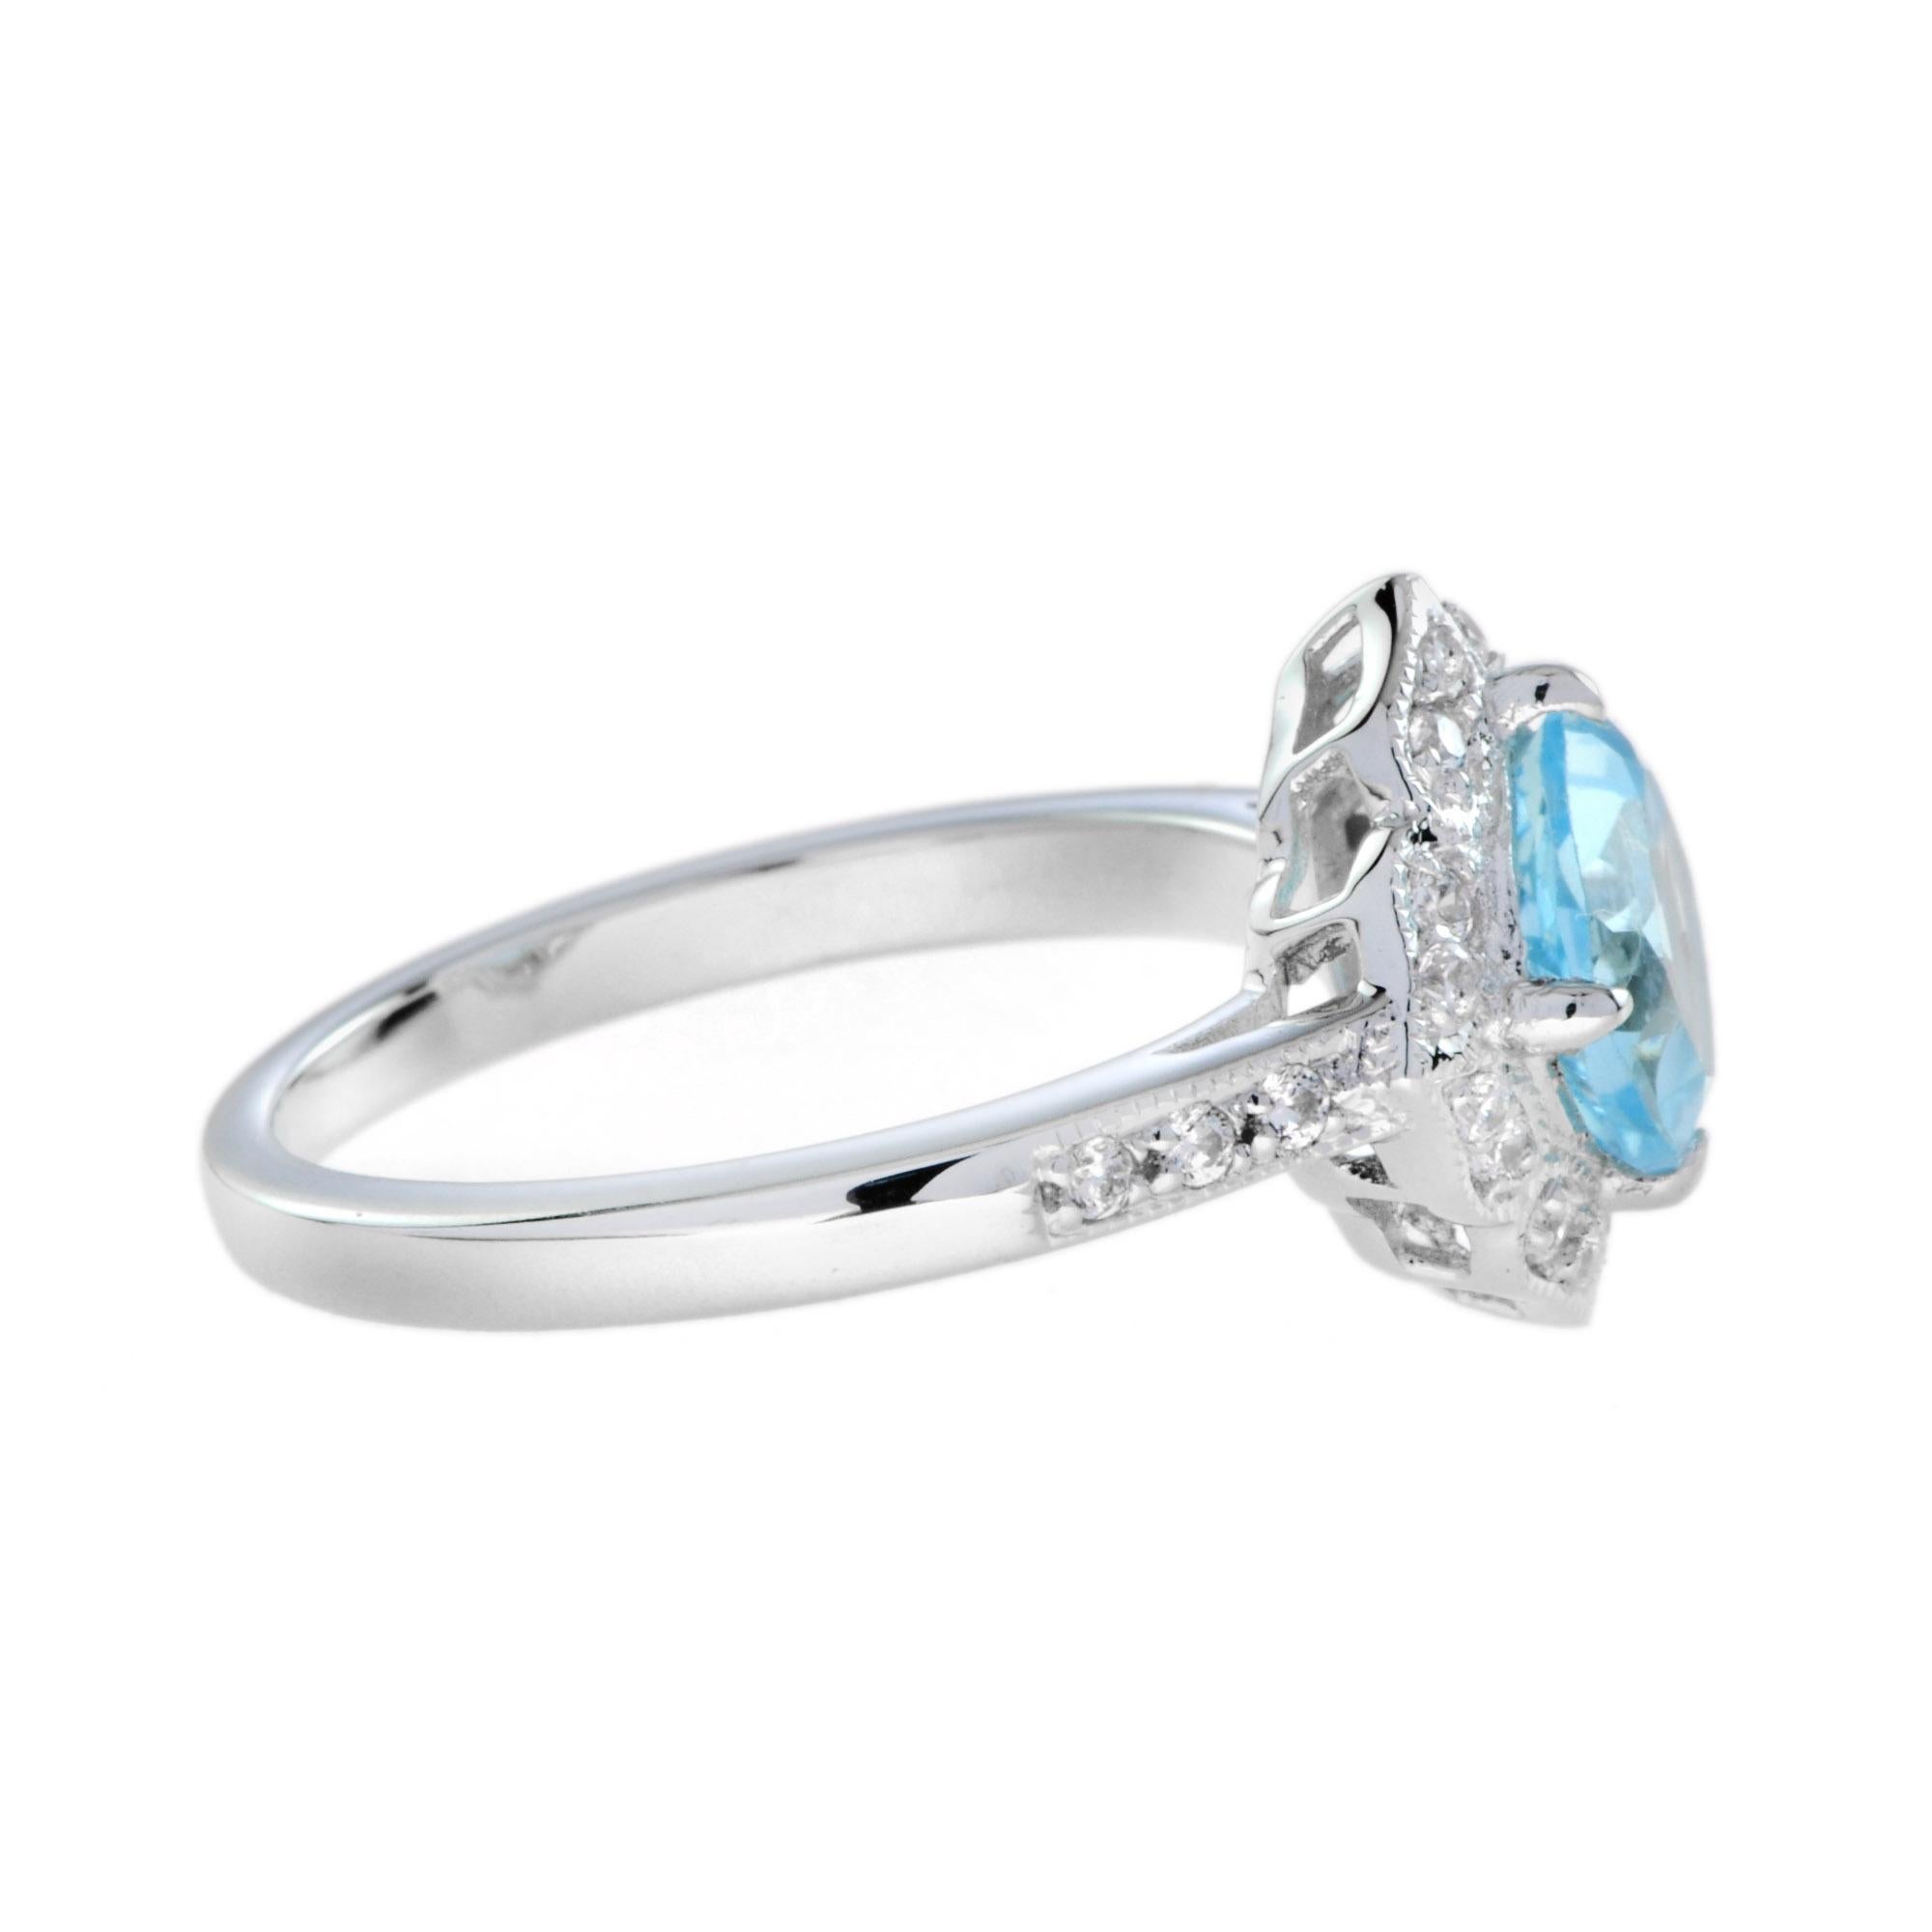 For Sale:  Cushion Blue Topaz and Diamond Vintage Style Engagement Ring in 14K White Gold 4